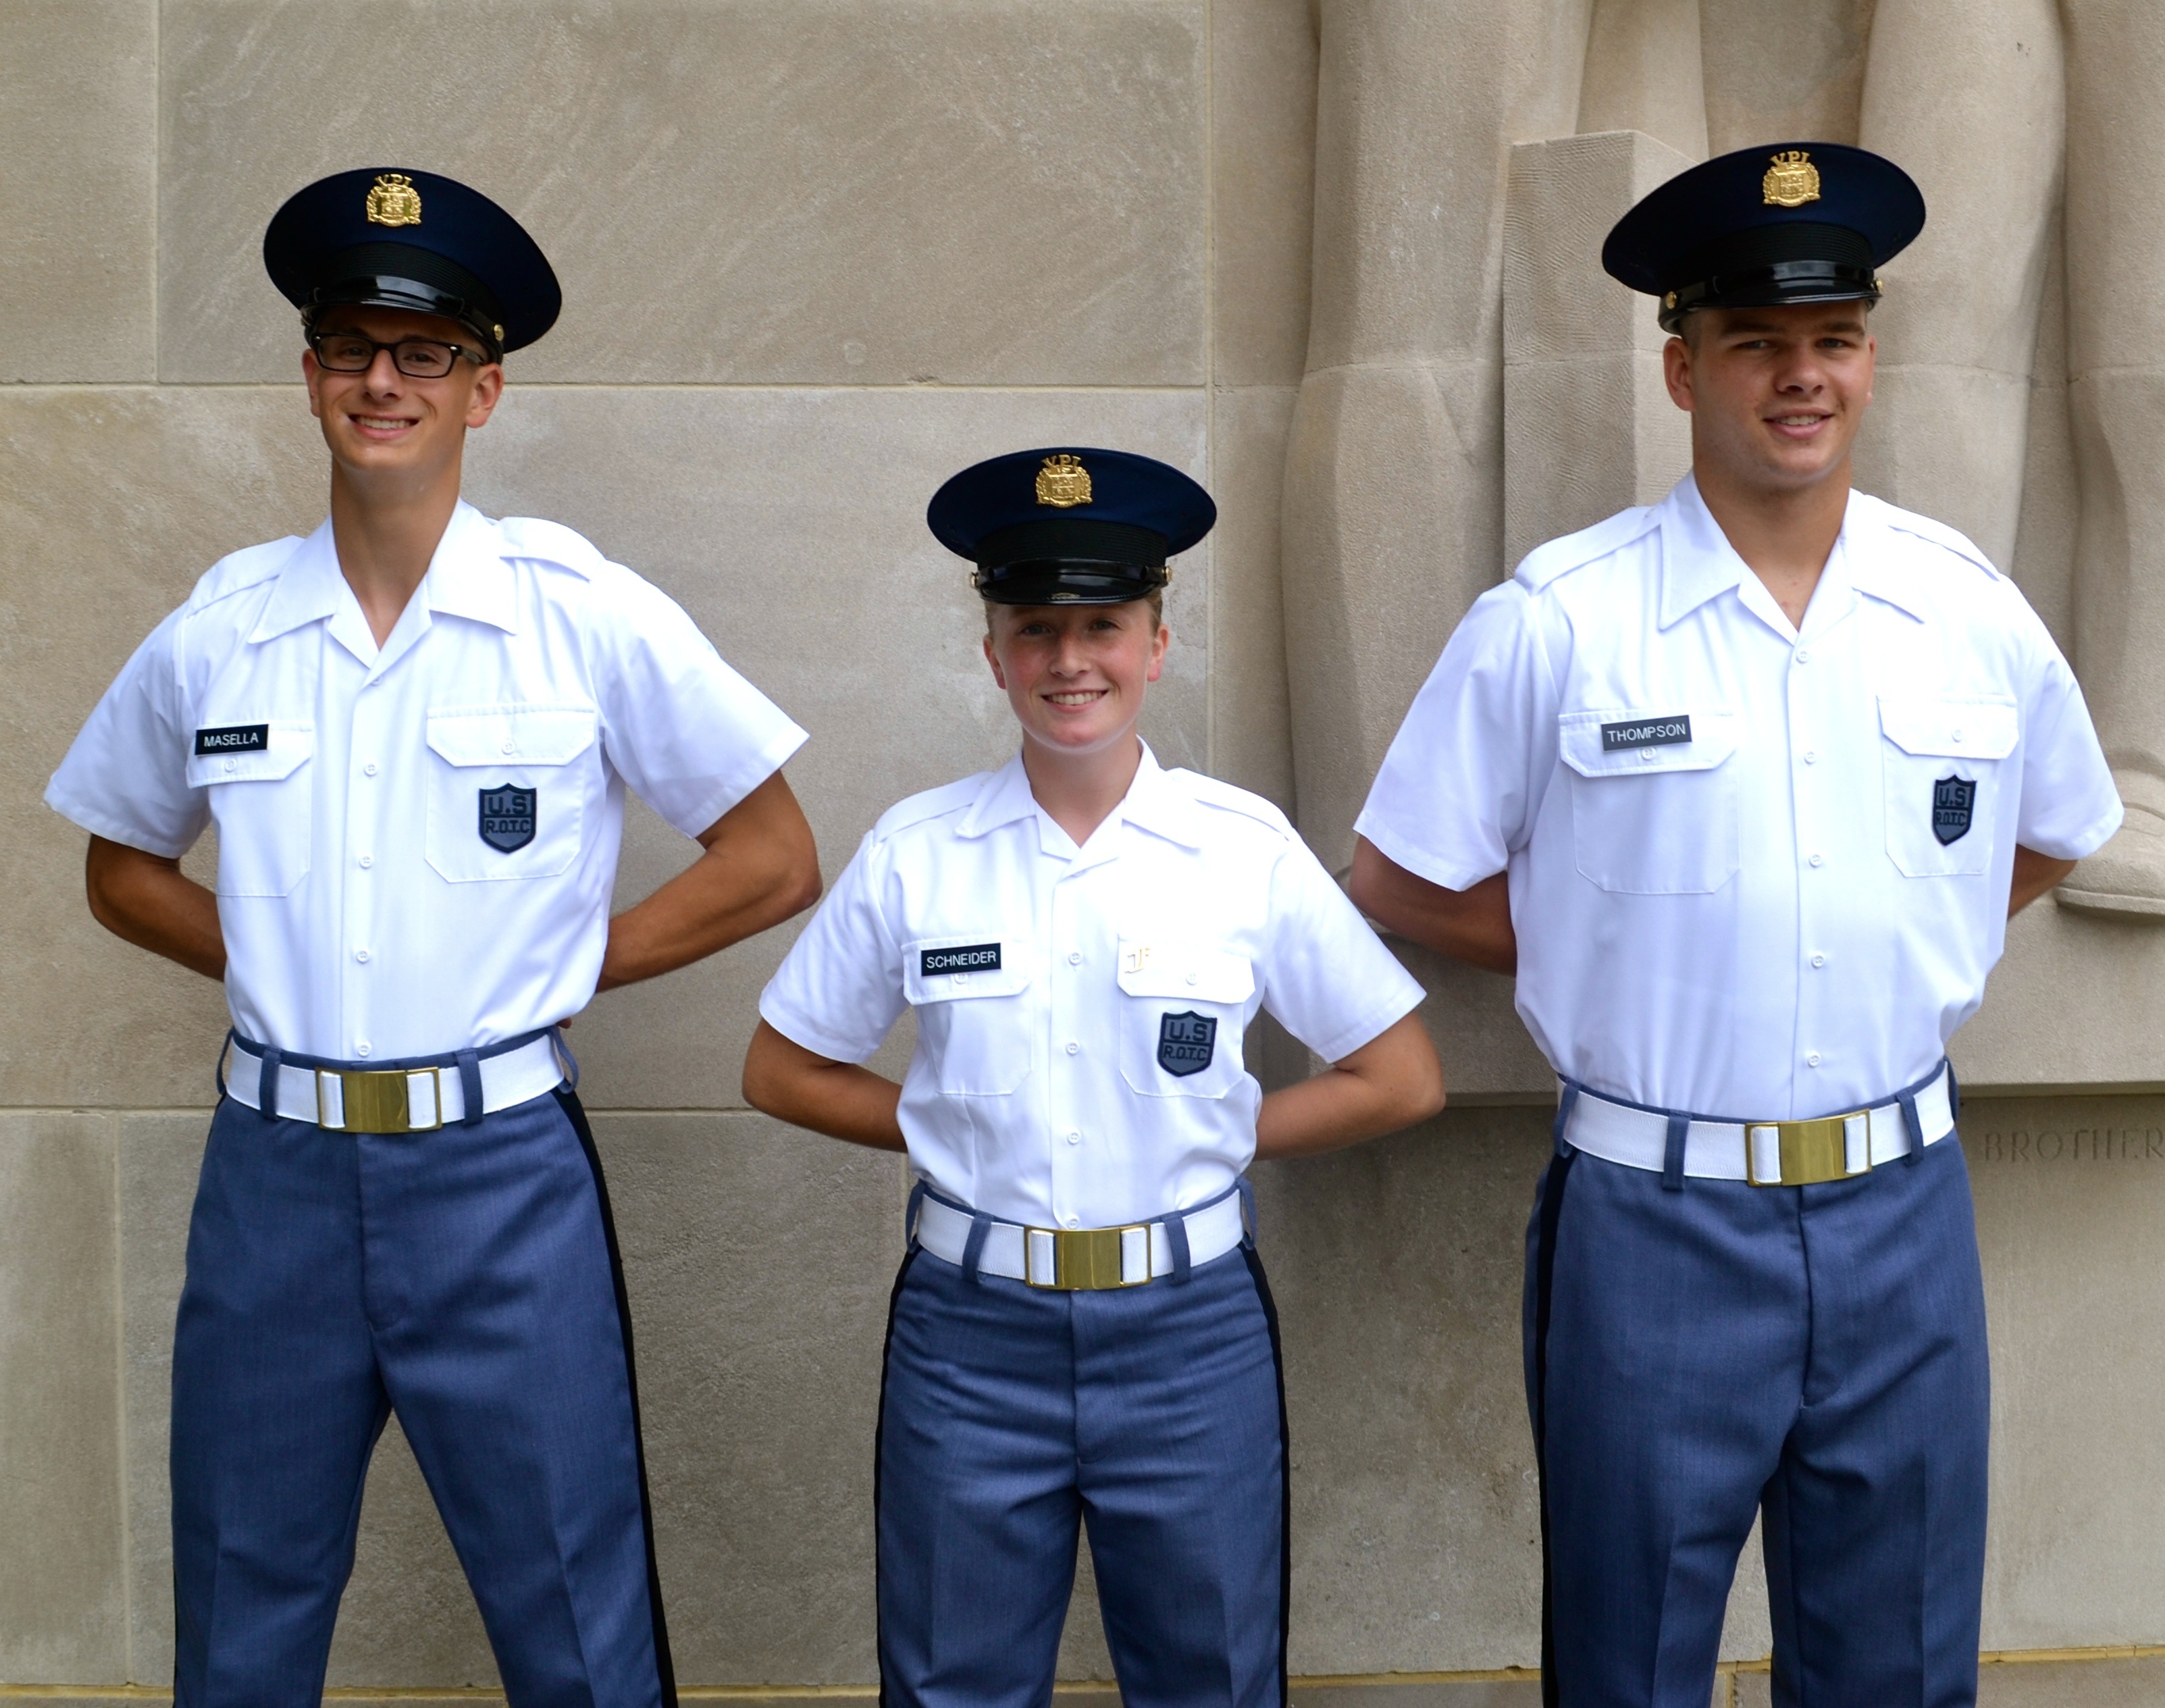 Standing in front of the Pylongs from left to right are Cadets Nicholas Masella, Robyn Schneider, and Matthew Thompson.